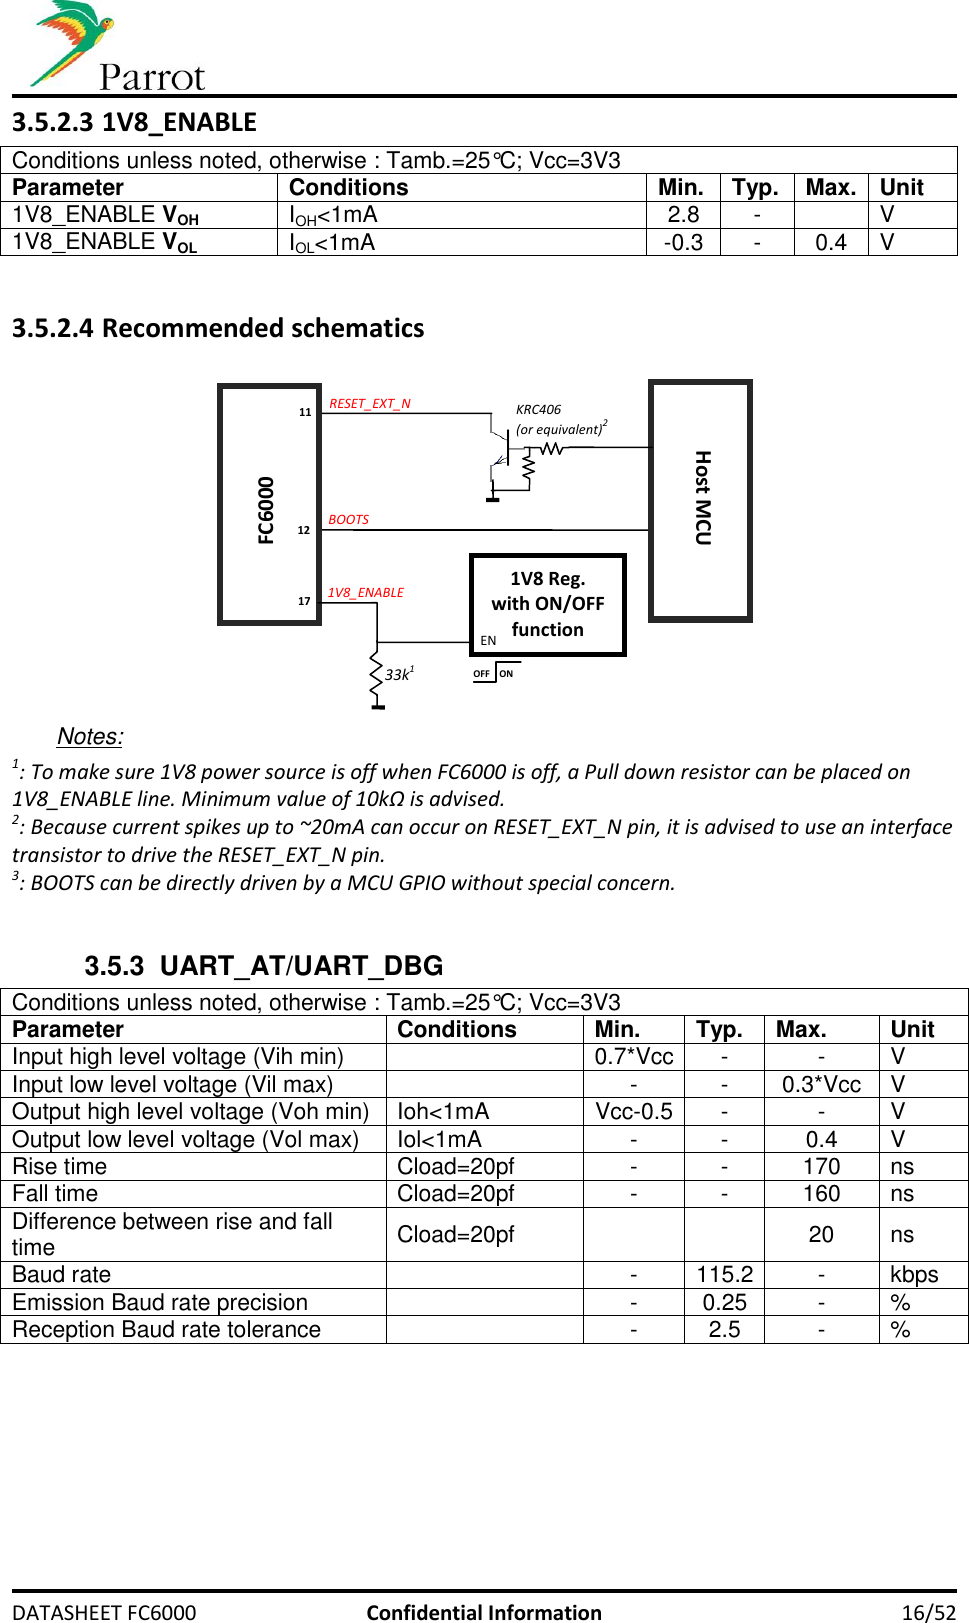     DATASHEET FC6000  Confidential Information 16/52 3.5.2.3 1V8_ENABLE Conditions unless noted, otherwise : Tamb.=25°C; Vcc=3V3 Parameter Conditions Min. Typ. Max. Unit 1V8_ENABLE VOH IOH&lt;1mA 2.8 -  V 1V8_ENABLE VOL IOL&lt;1mA -0.3 - 0.4 V  3.5.2.4 Recommended schematics     Notes: 1: To make sure 1V8 power source is off when FC6000 is off, a Pull down resistor can be placed on 1V8_ENABLE line. Minimum value of 10kΩ is advised. 2: Because current spikes up to ~20mA can occur on RESET_EXT_N pin, it is advised to use an interface transistor to drive the RESET_EXT_N pin. 3: BOOTS can be directly driven by a MCU GPIO without special concern.  3.5.3  UART_AT/UART_DBG Conditions unless noted, otherwise : Tamb.=25°C; Vcc=3V3 Parameter Conditions Min. Typ. Max. Unit Input high level voltage (Vih min)  0.7*Vcc - - V Input low level voltage (Vil max)  - - 0.3*Vcc V Output high level voltage (Voh min) Ioh&lt;1mA Vcc-0.5 - - V Output low level voltage (Vol max) Iol&lt;1mA - - 0.4 V Rise time Cload=20pf - - 170 ns Fall time Cload=20pf - - 160 ns Difference between rise and fall time Cload=20pf   20 ns Baud rate  - 115.2 - kbps Emission Baud rate precision  - 0.25 - % Reception Baud rate tolerance  - 2.5 - %  BOOTS RESET_EXT_N FC6000 Host MCU KRC406  (or equivalent)2 11 12 1V8_ENABLE EN OFF ON 17 33k1 1V8 Reg. with ON/OFF function 